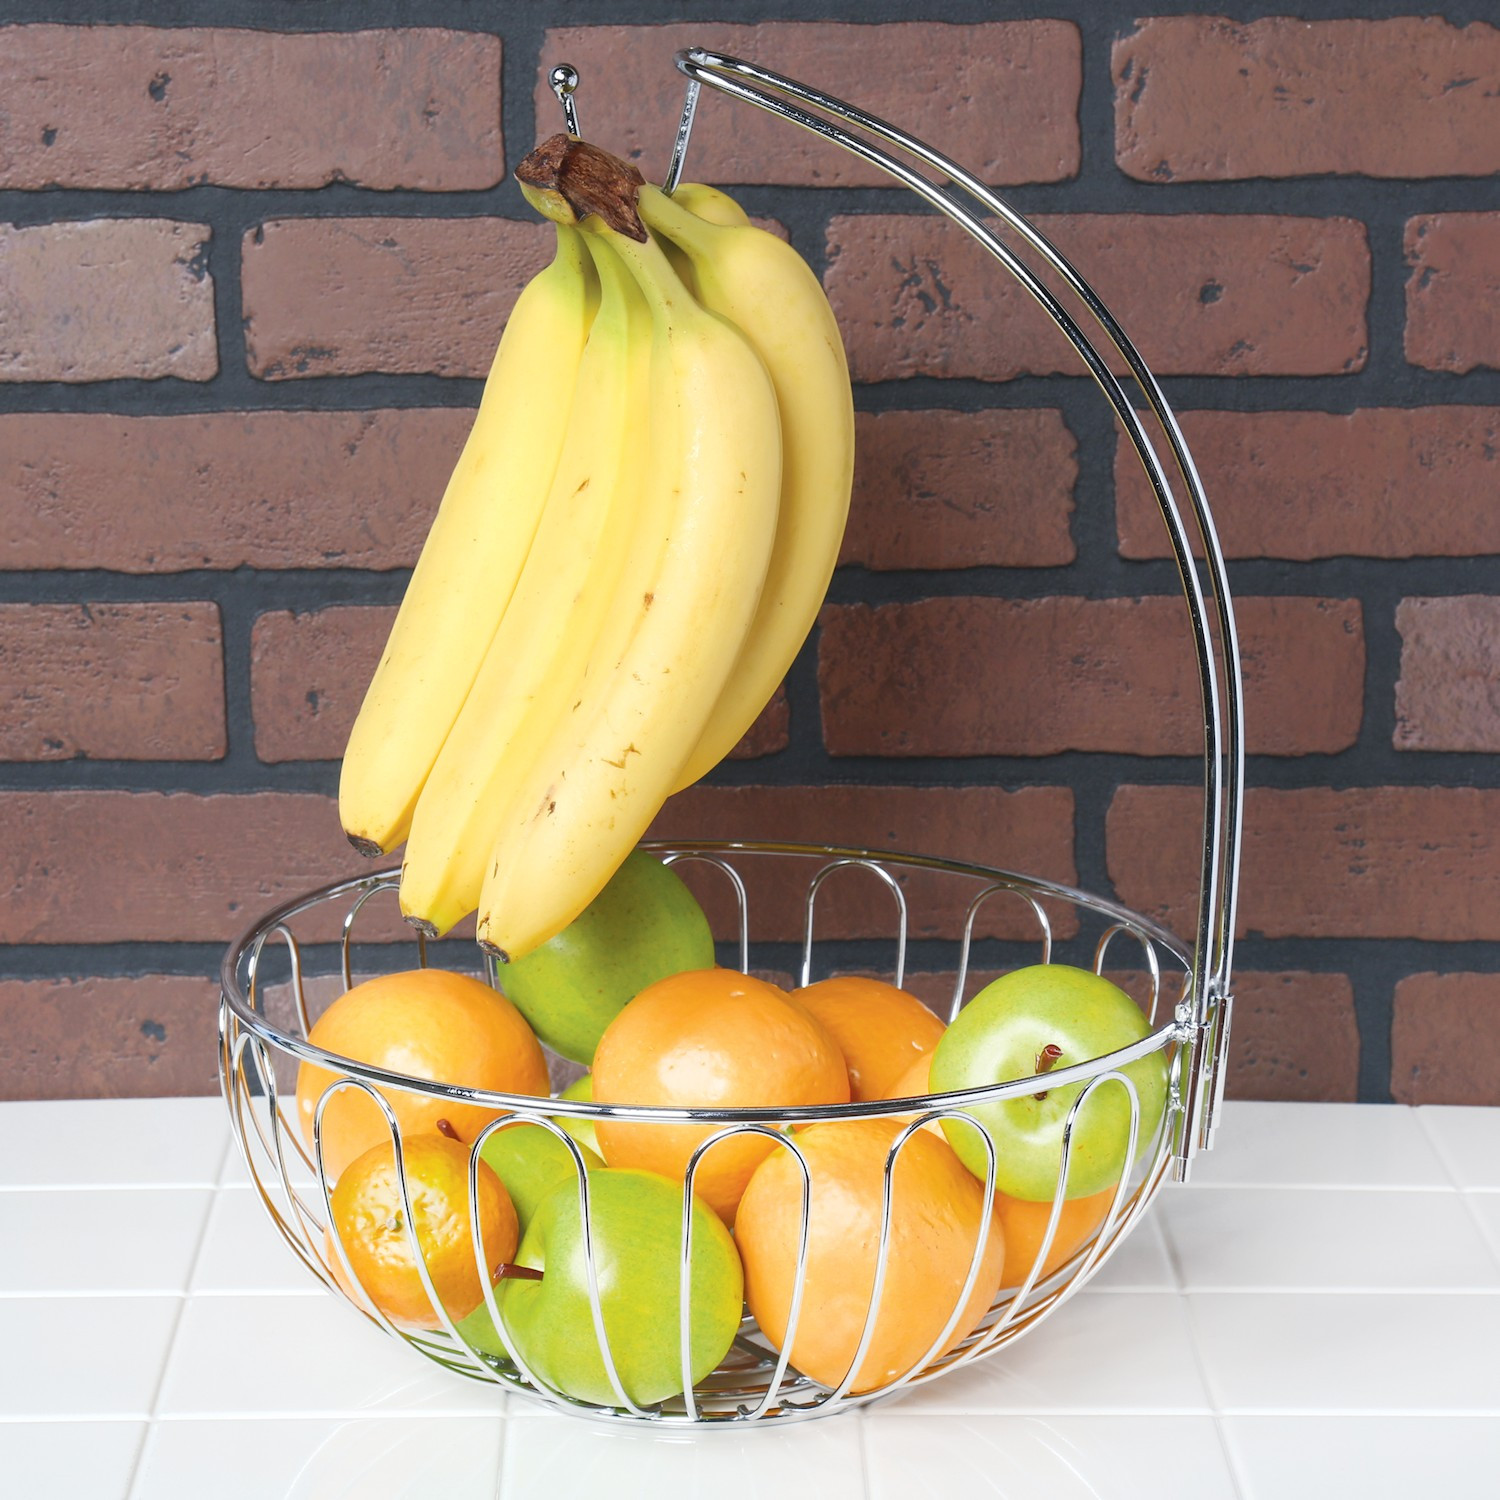 Unusual Fruit Bowl With Banana Hanger But I Didnt Realize How Much